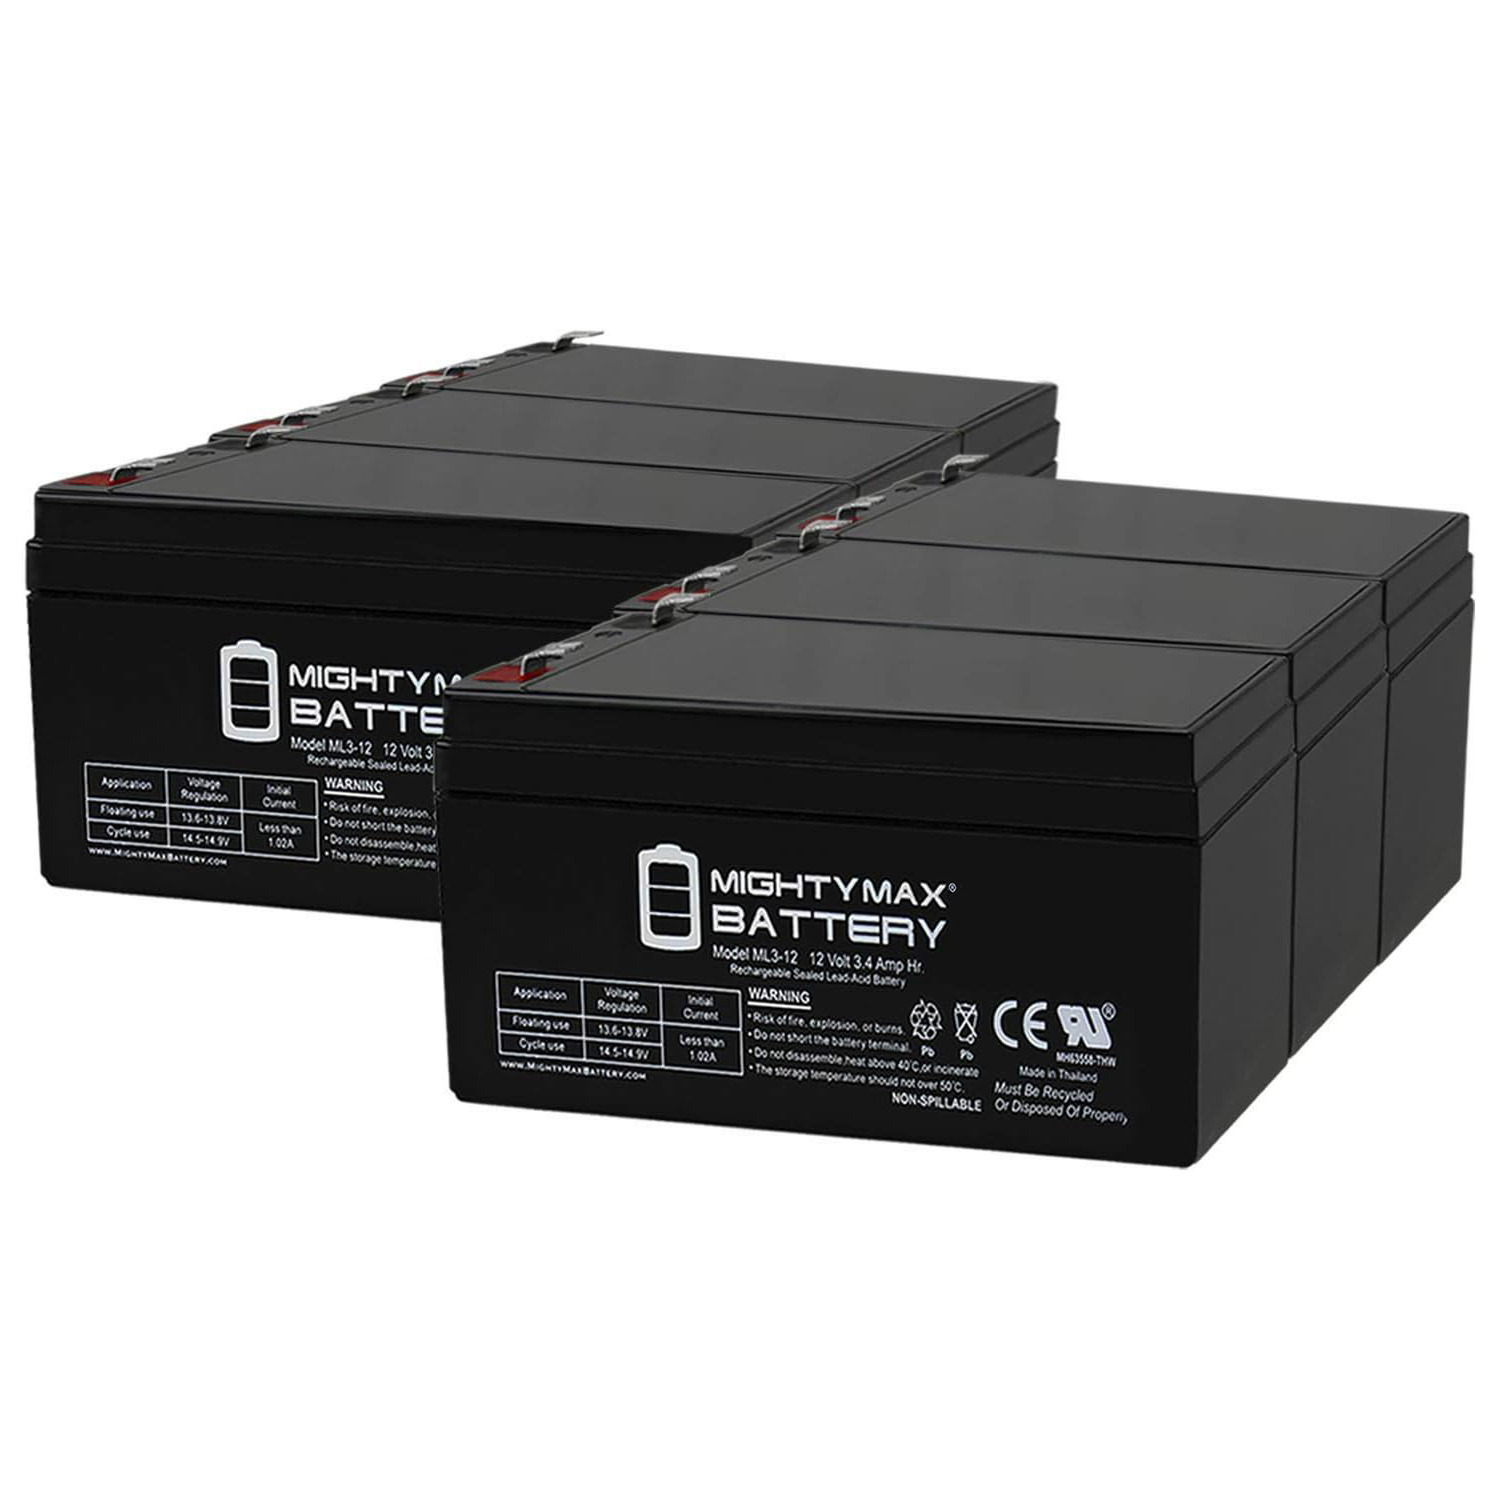 12V 3AH SLA Replacement Battery for Arthocome Console Amsco - 6 Pack